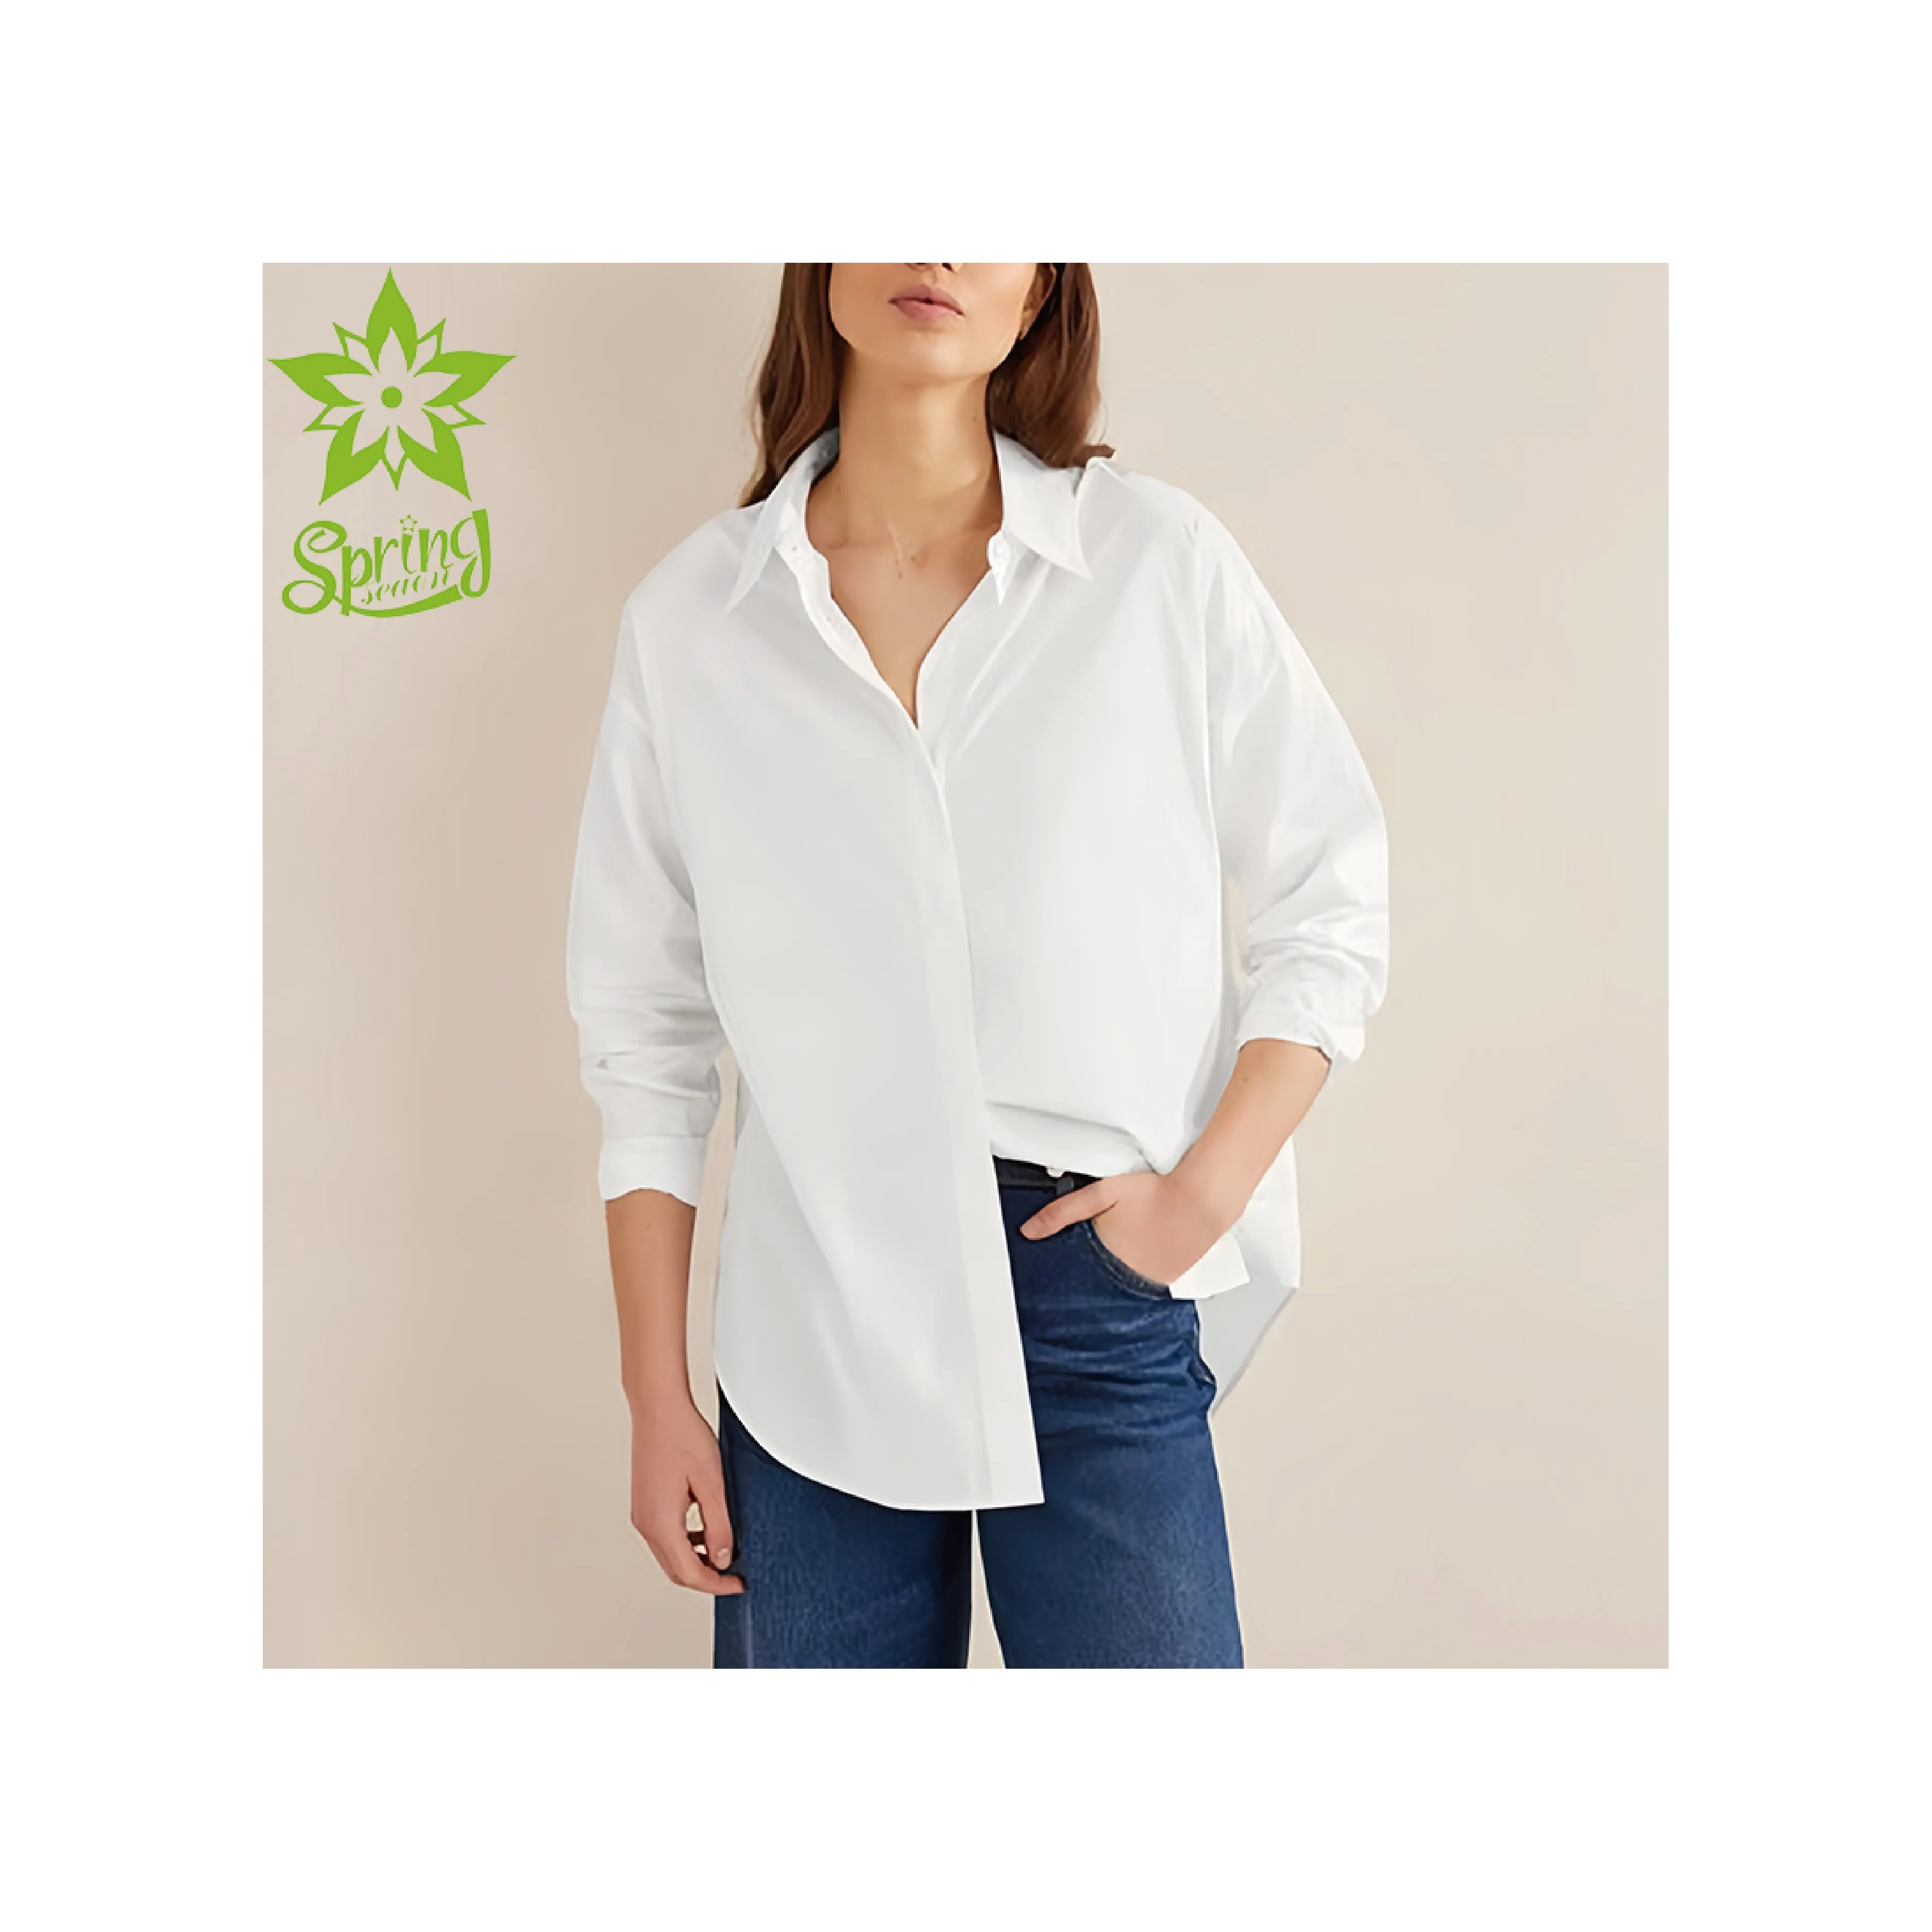 New Arrivals Custom Women White Fashion Tops Oversized Button Up Elegant Female Shirts camisas para mujer Formal Women's Blouses